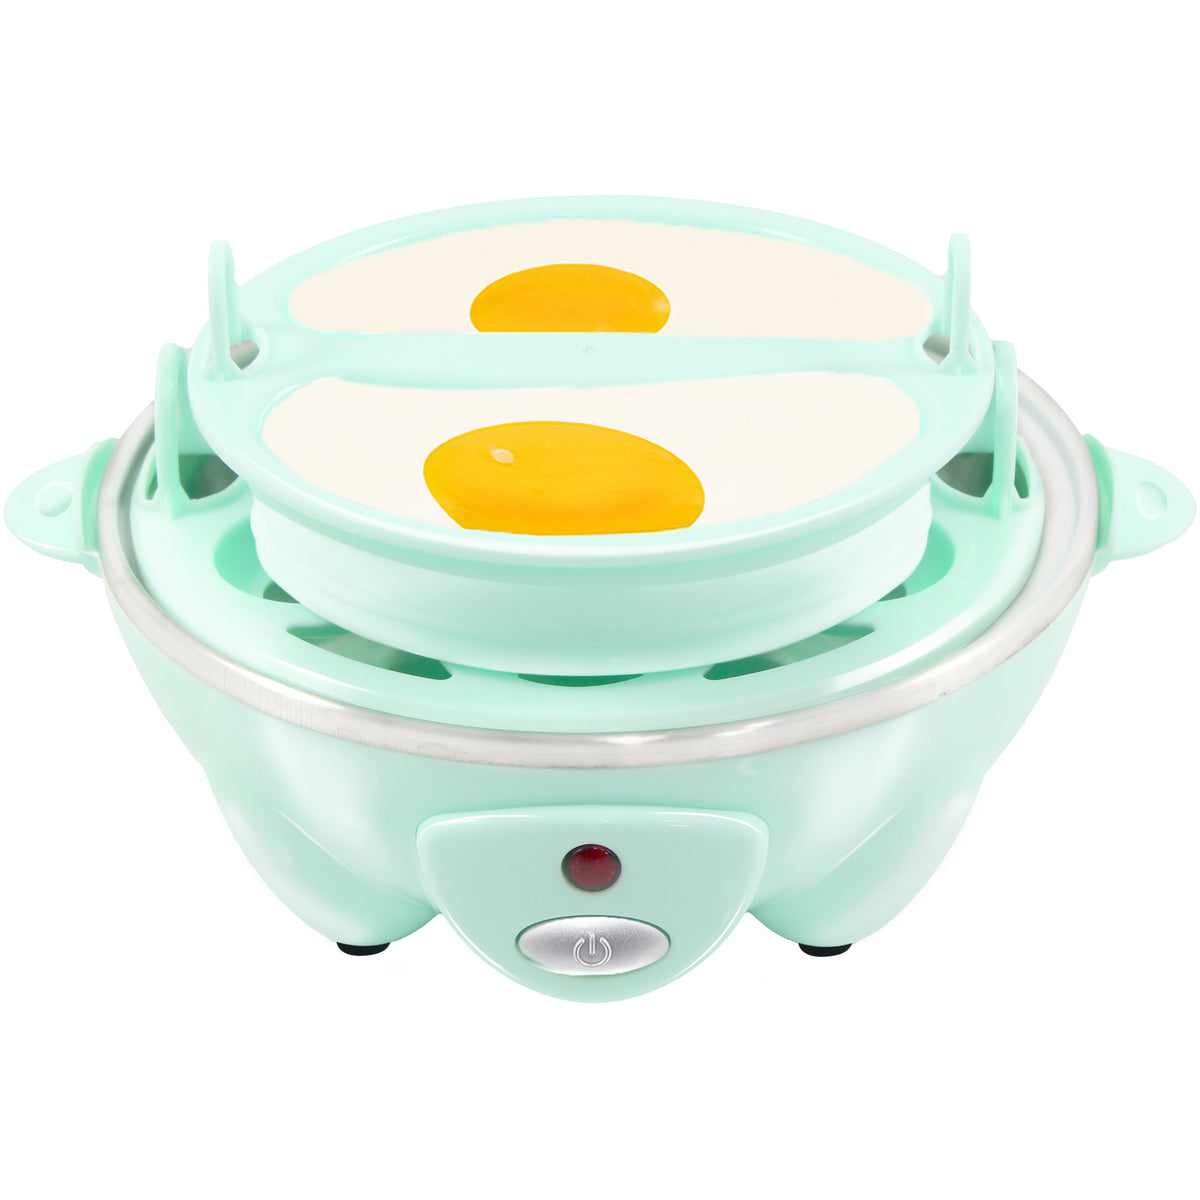 Elite Gourmet EGC115M Easy Egg Cooker Electric 7-Egg Capacity, Soft,  Medium, Hard-Boiled Egg Cooker with Auto Shut-Off, Measuring Cup Included,  BPA